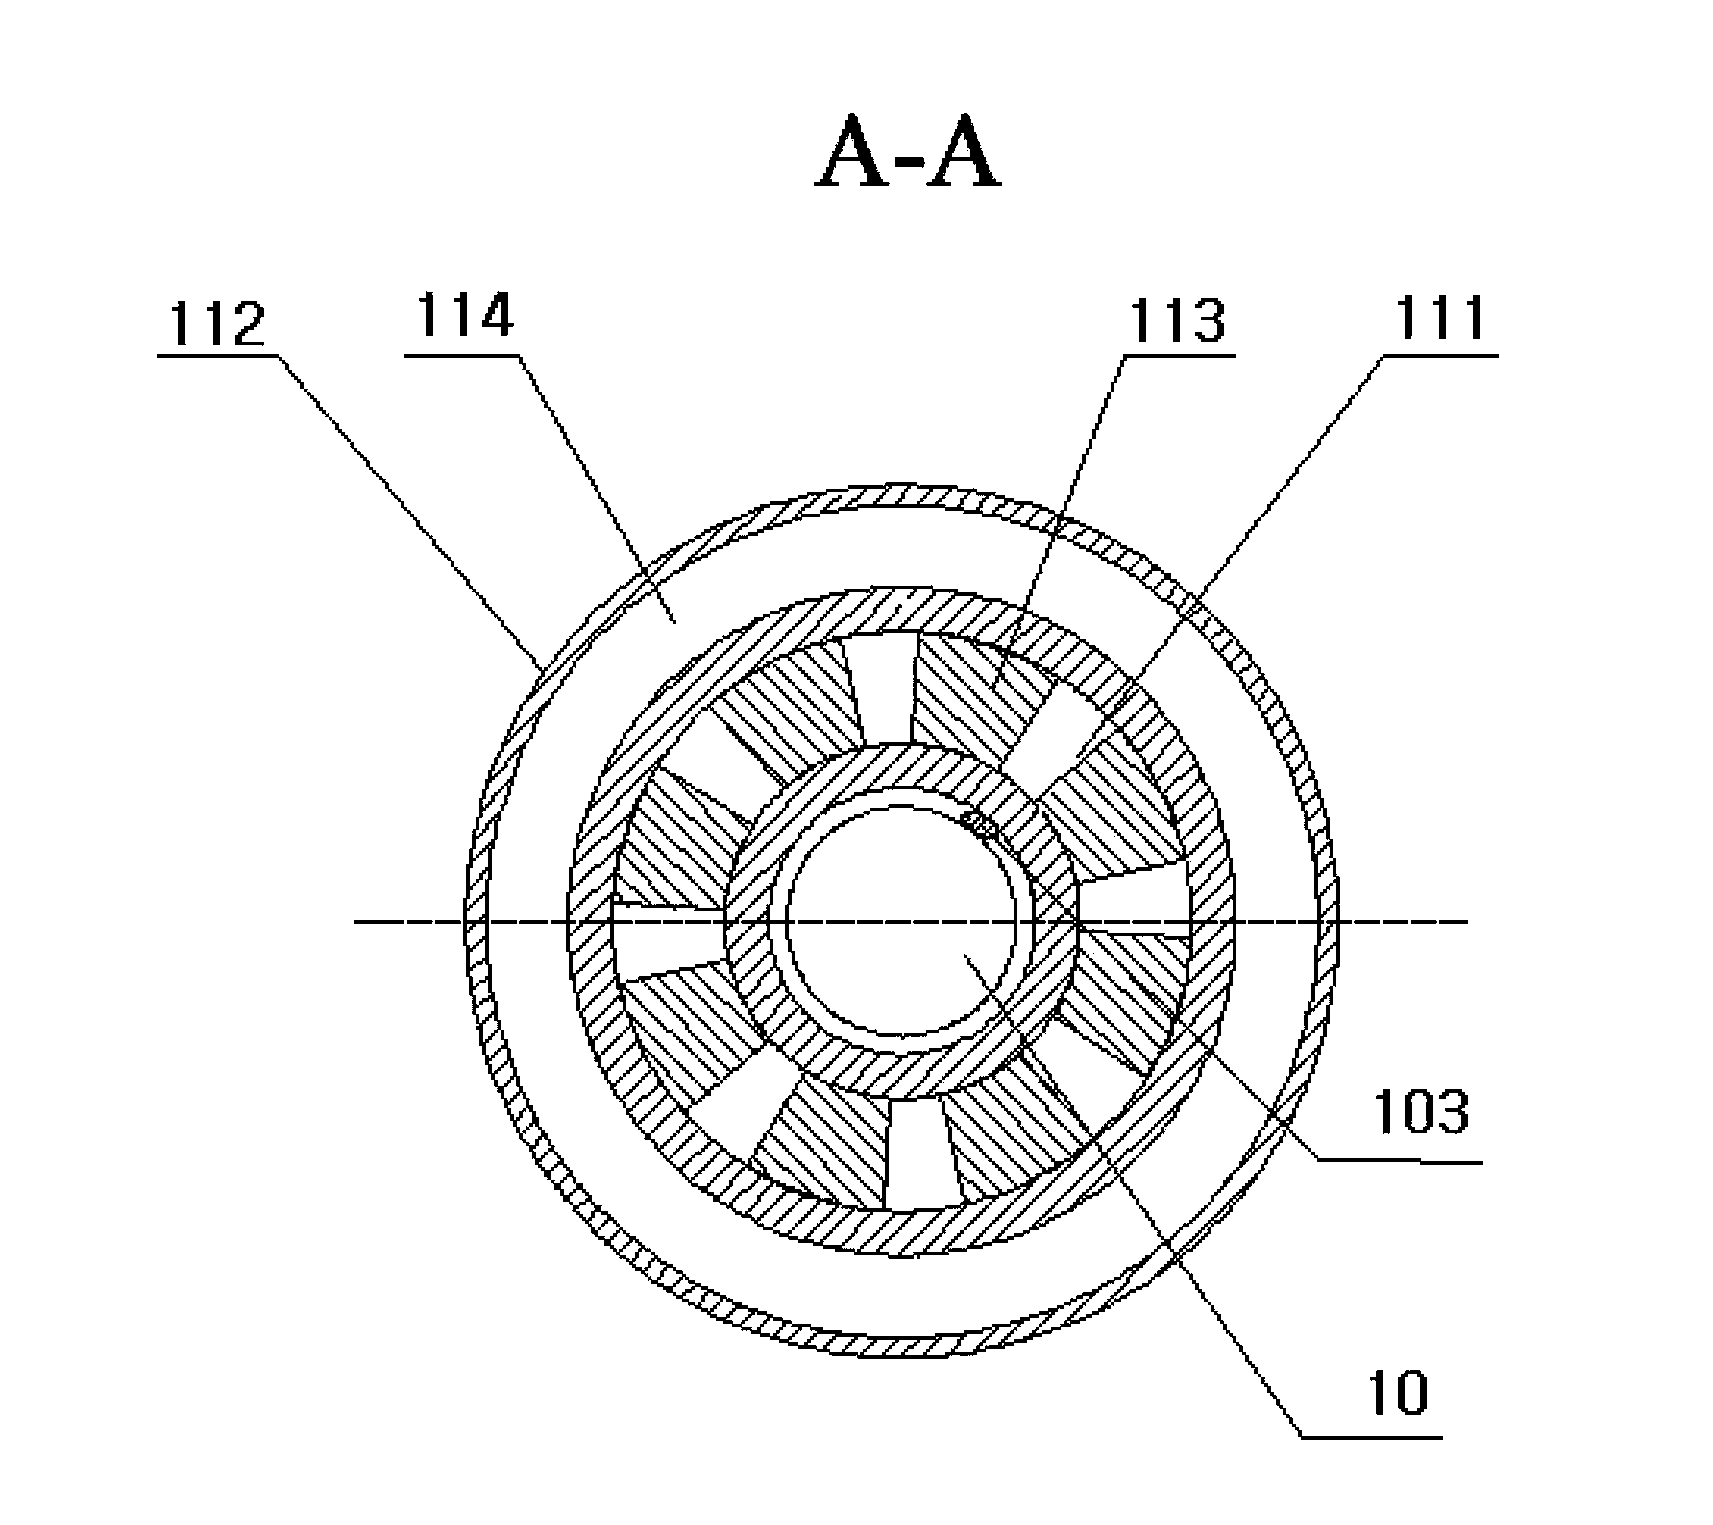 Flue gas waste heat thermoelectric recovery device